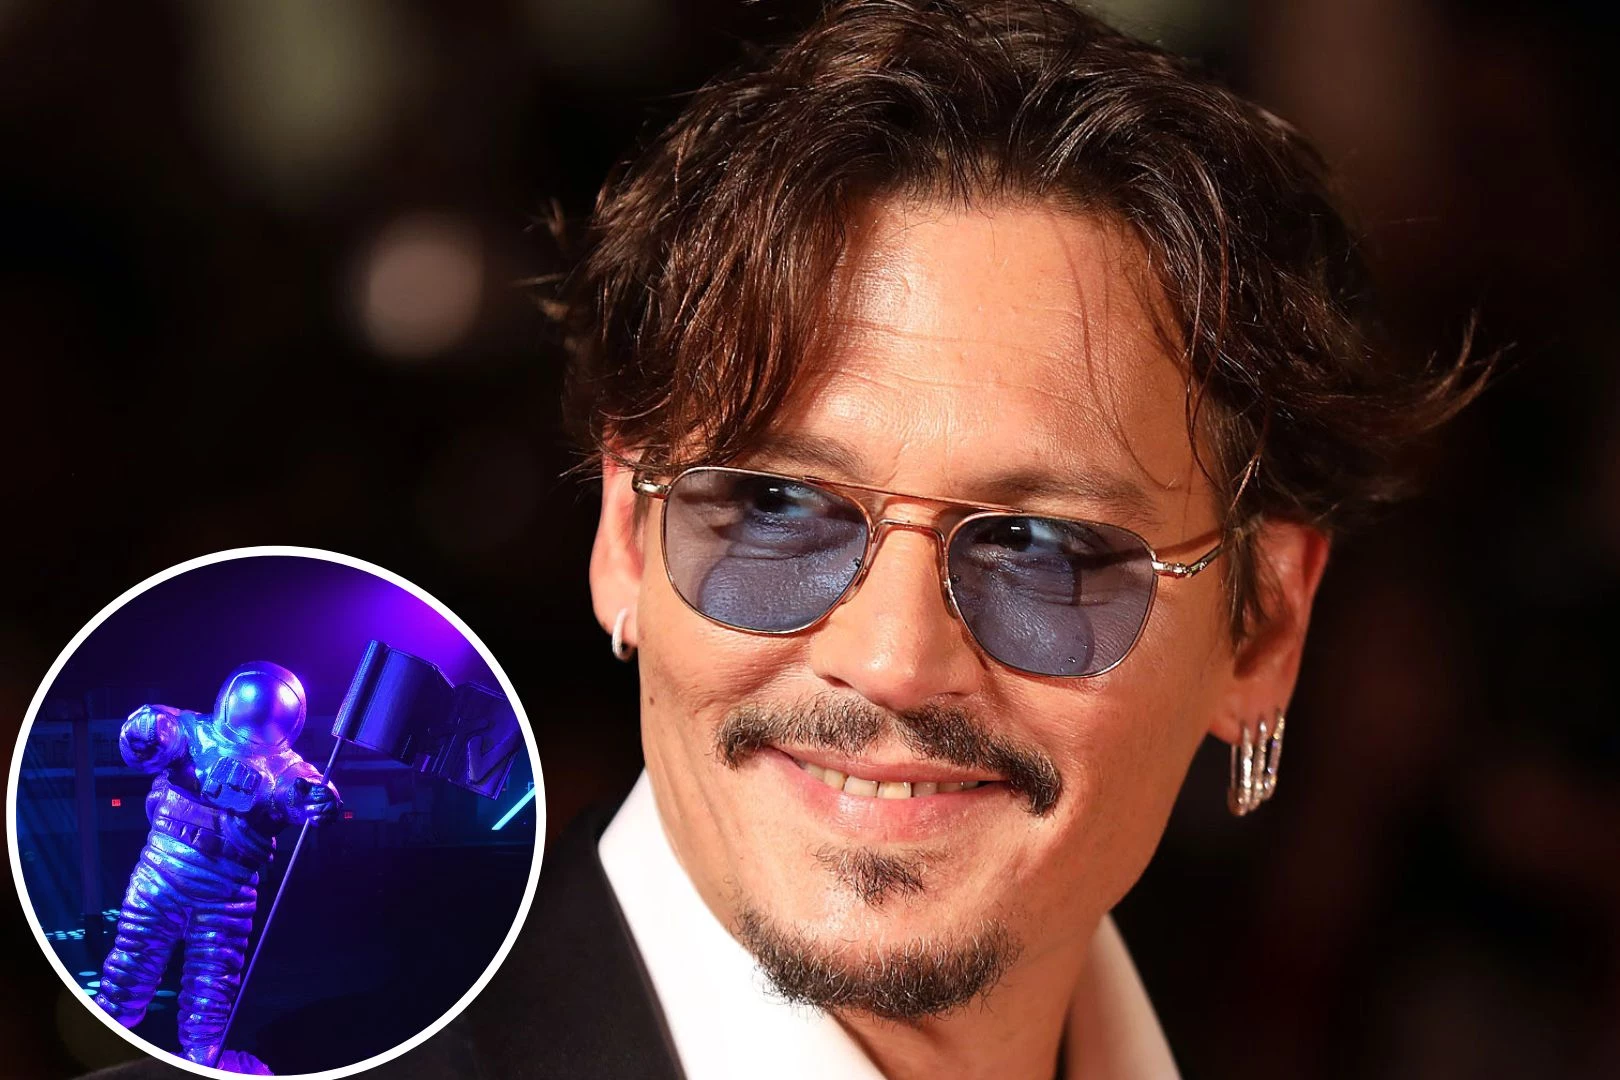 Johnny Depp to Make Surprise Appearance at 2022 MTV VMAs (REPORT)